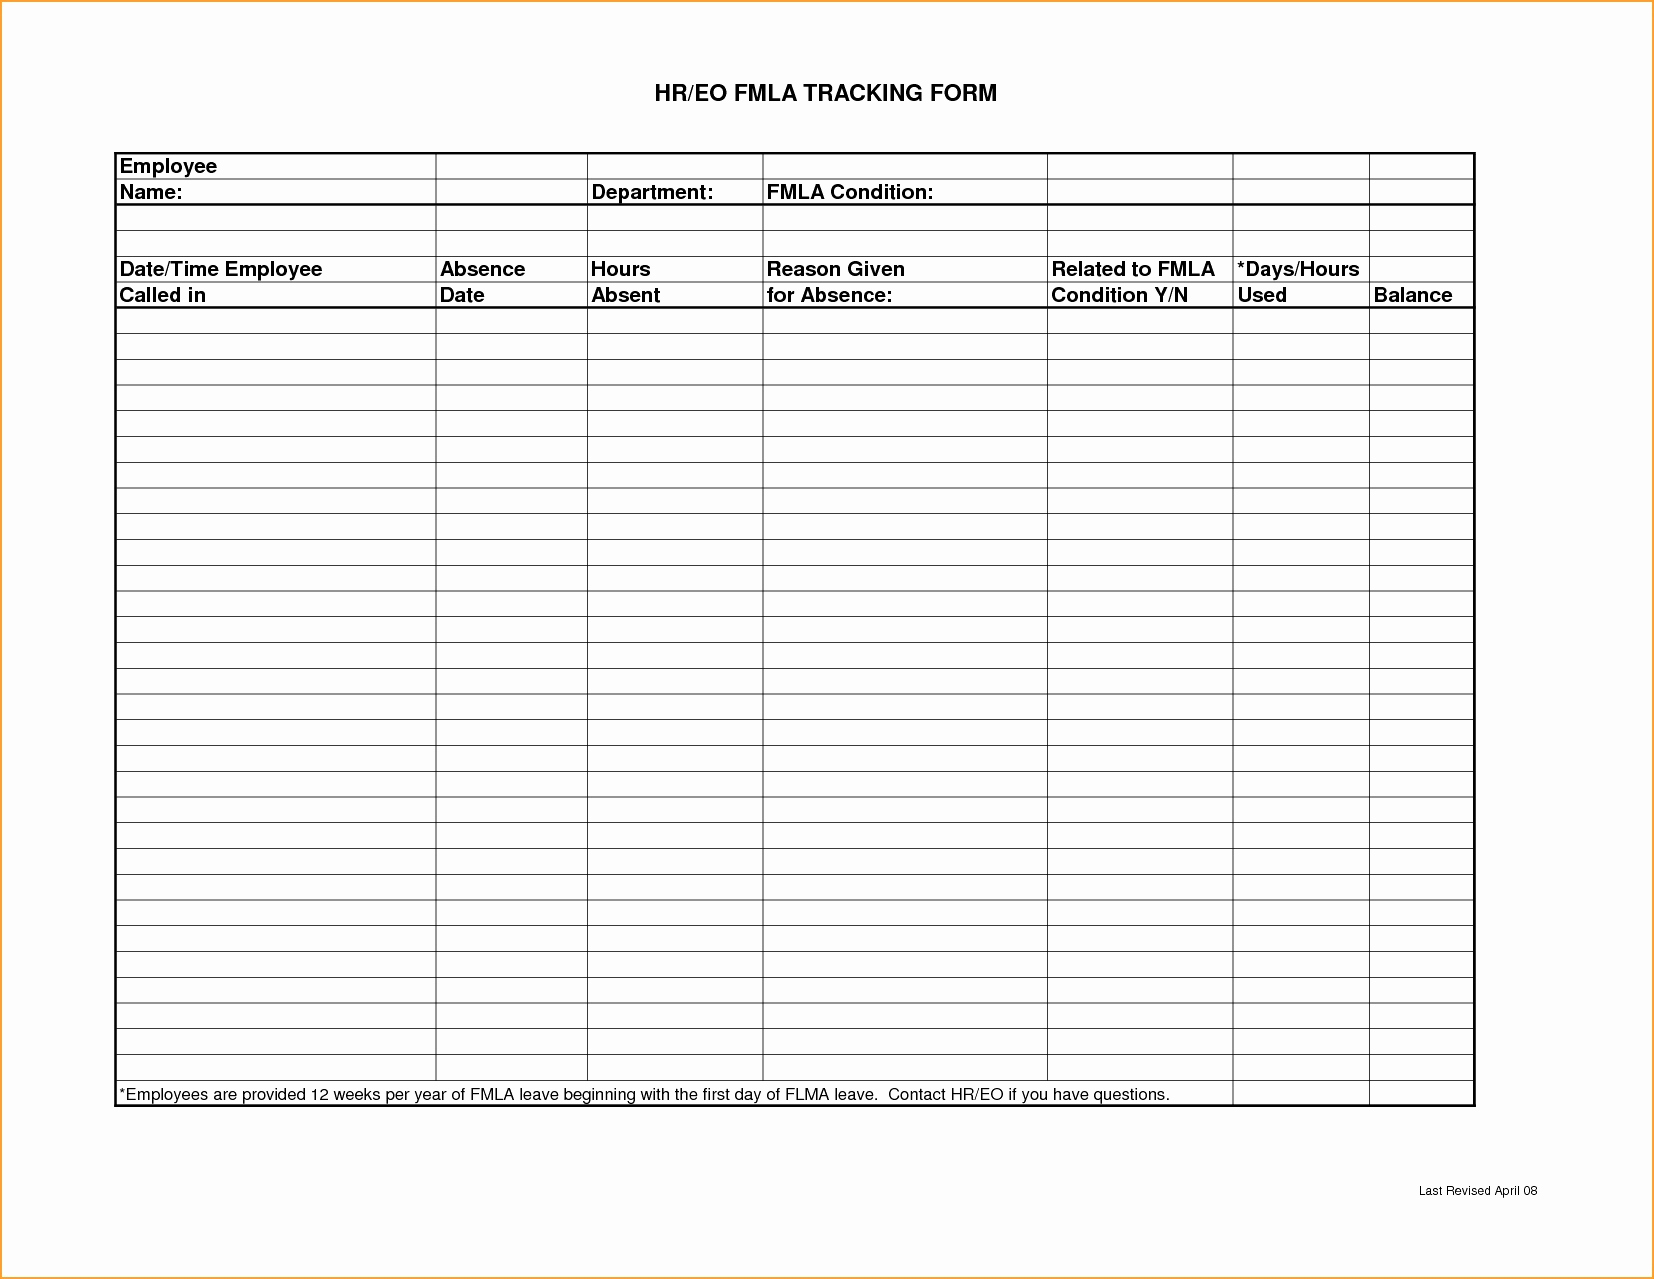 Coupon Spreadsheet App Awesome Nist 800 53A Rev 4 Spreadsheet Intended For Coupon Spreadsheet App